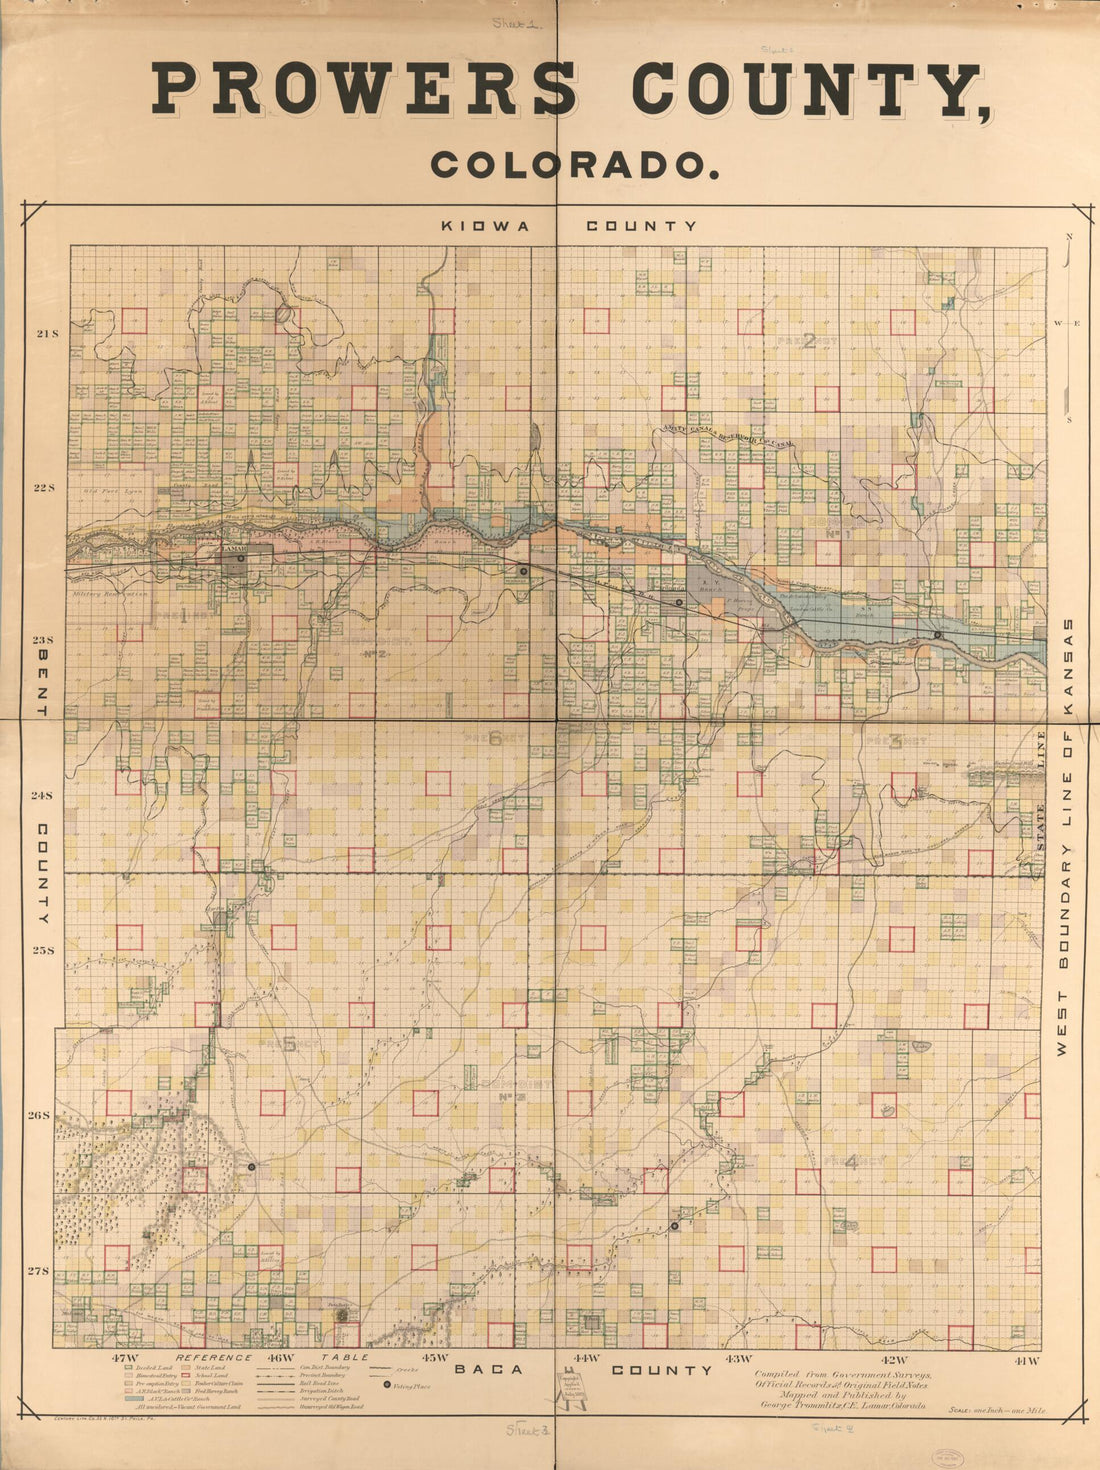 This old map of Prowers County, Colorado from 1889 was created by George Trommlitz in 1889